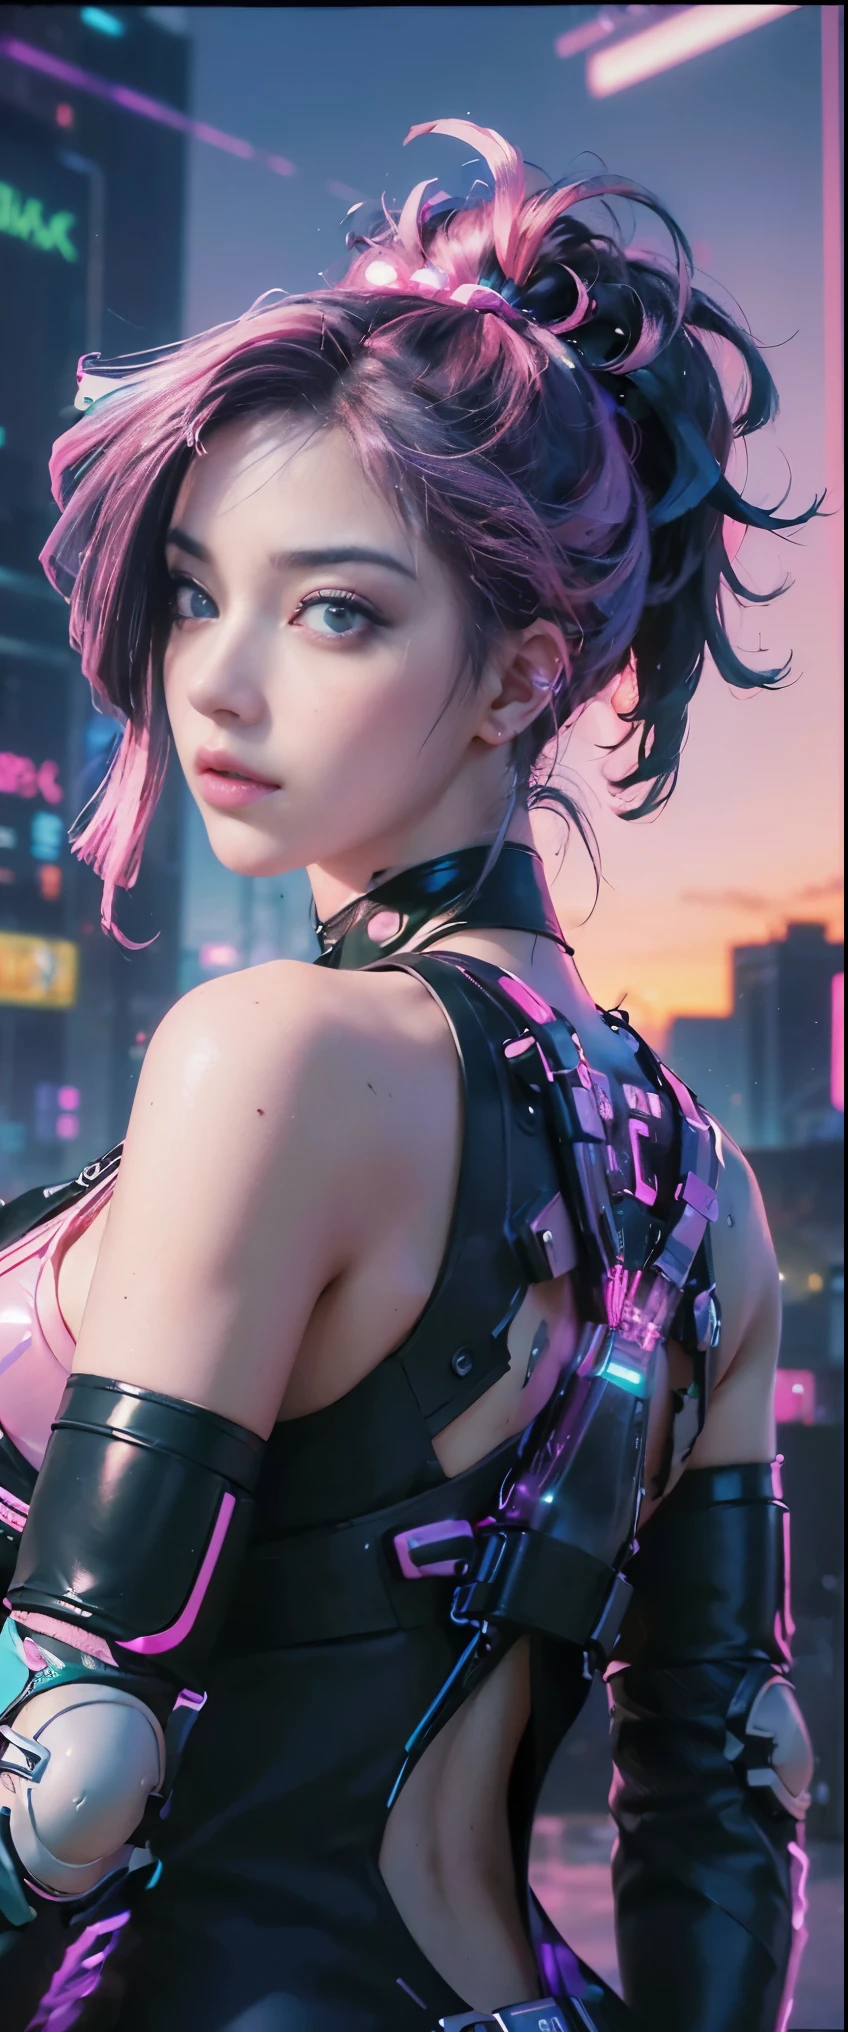 (highest quality), ((masterpiece), (detailed: 1.4), 3D, beautiful cyberpunk woman, HDR (high dynamic range), ray tracing, NVIDIA RTX, super resolution, unreal 5, a close up of a computer screen with a cartoon of a woman, vaporwave art, vaporwave cartoon, vaporwave style, vaporwave!, vaporwave nostalgia, vaporwave style masterpiece, maximalist vaporwave, vaporwave, cyberpunk vaporwave, very vaporwave, vaporwave aesthetics, vaporwave aesthetic, vaporwave pallette, vaporwave sci - fi, ((Fluorescent Pink Image)), Retro, Future, Wearing a transparent vinyl costume, NSFW:1.5, 